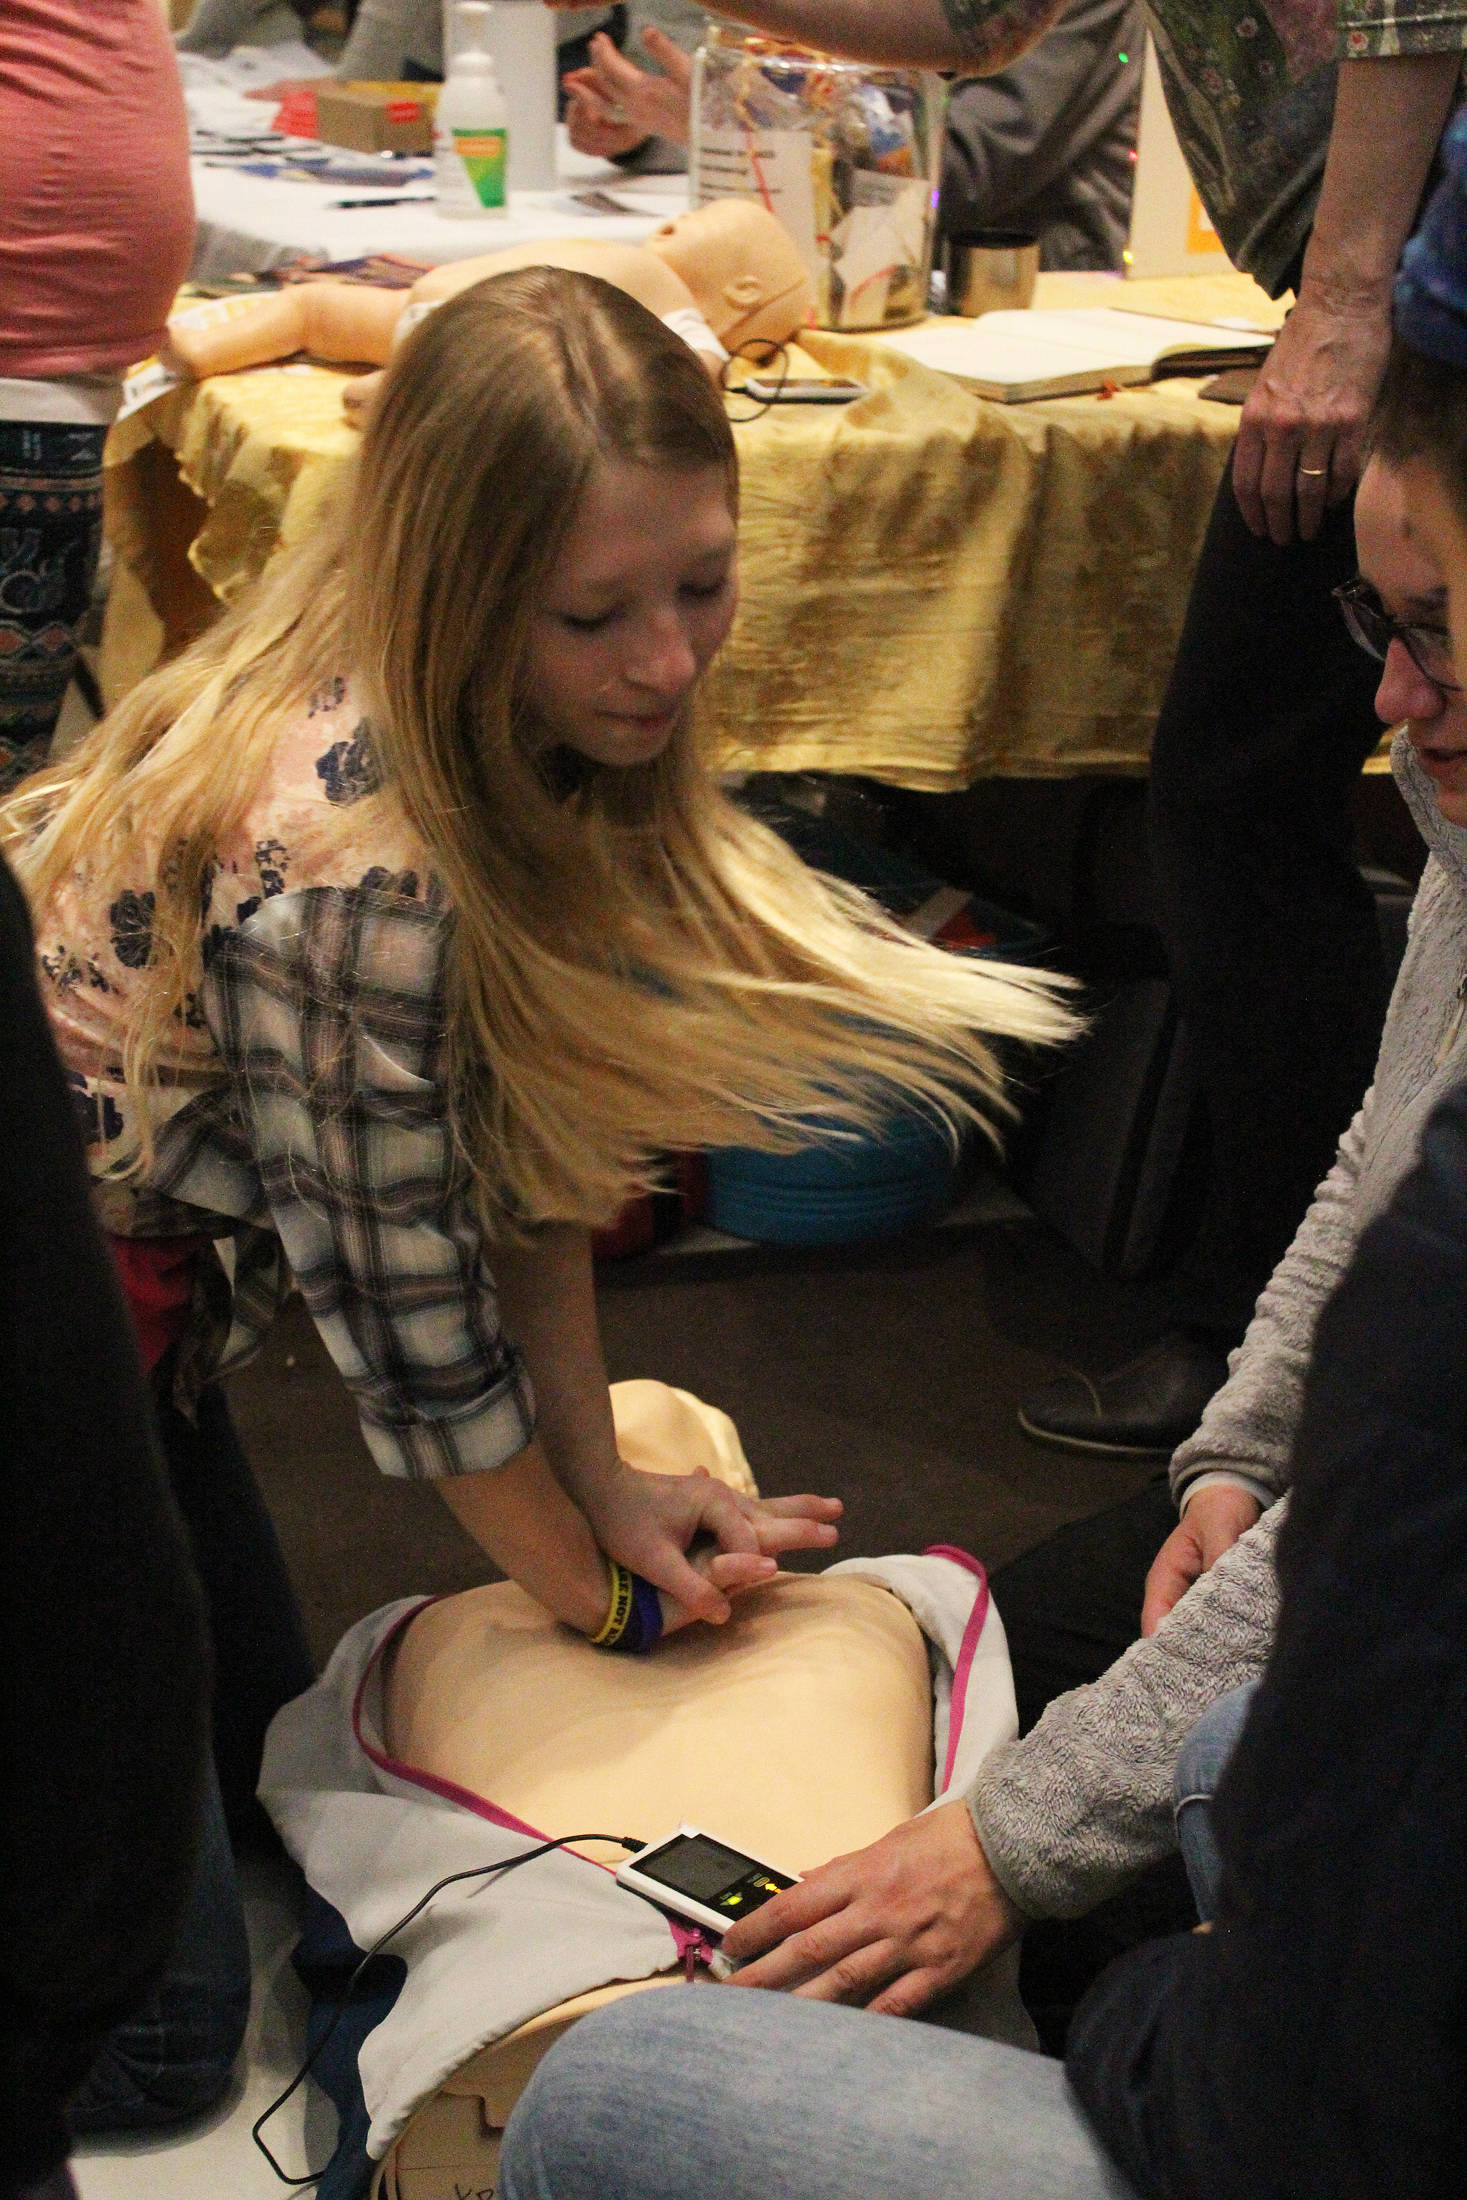 Maddox Berg, 14, practices performing CPR with the help of Homer Volunteer Fire Department’s Donna McNulty during the annual Rotary Health Fair on Saturday, Nov. 3, 2018 at Homer High School in Homer, Alaska. (Photo by Megan Pacer/Homer News)